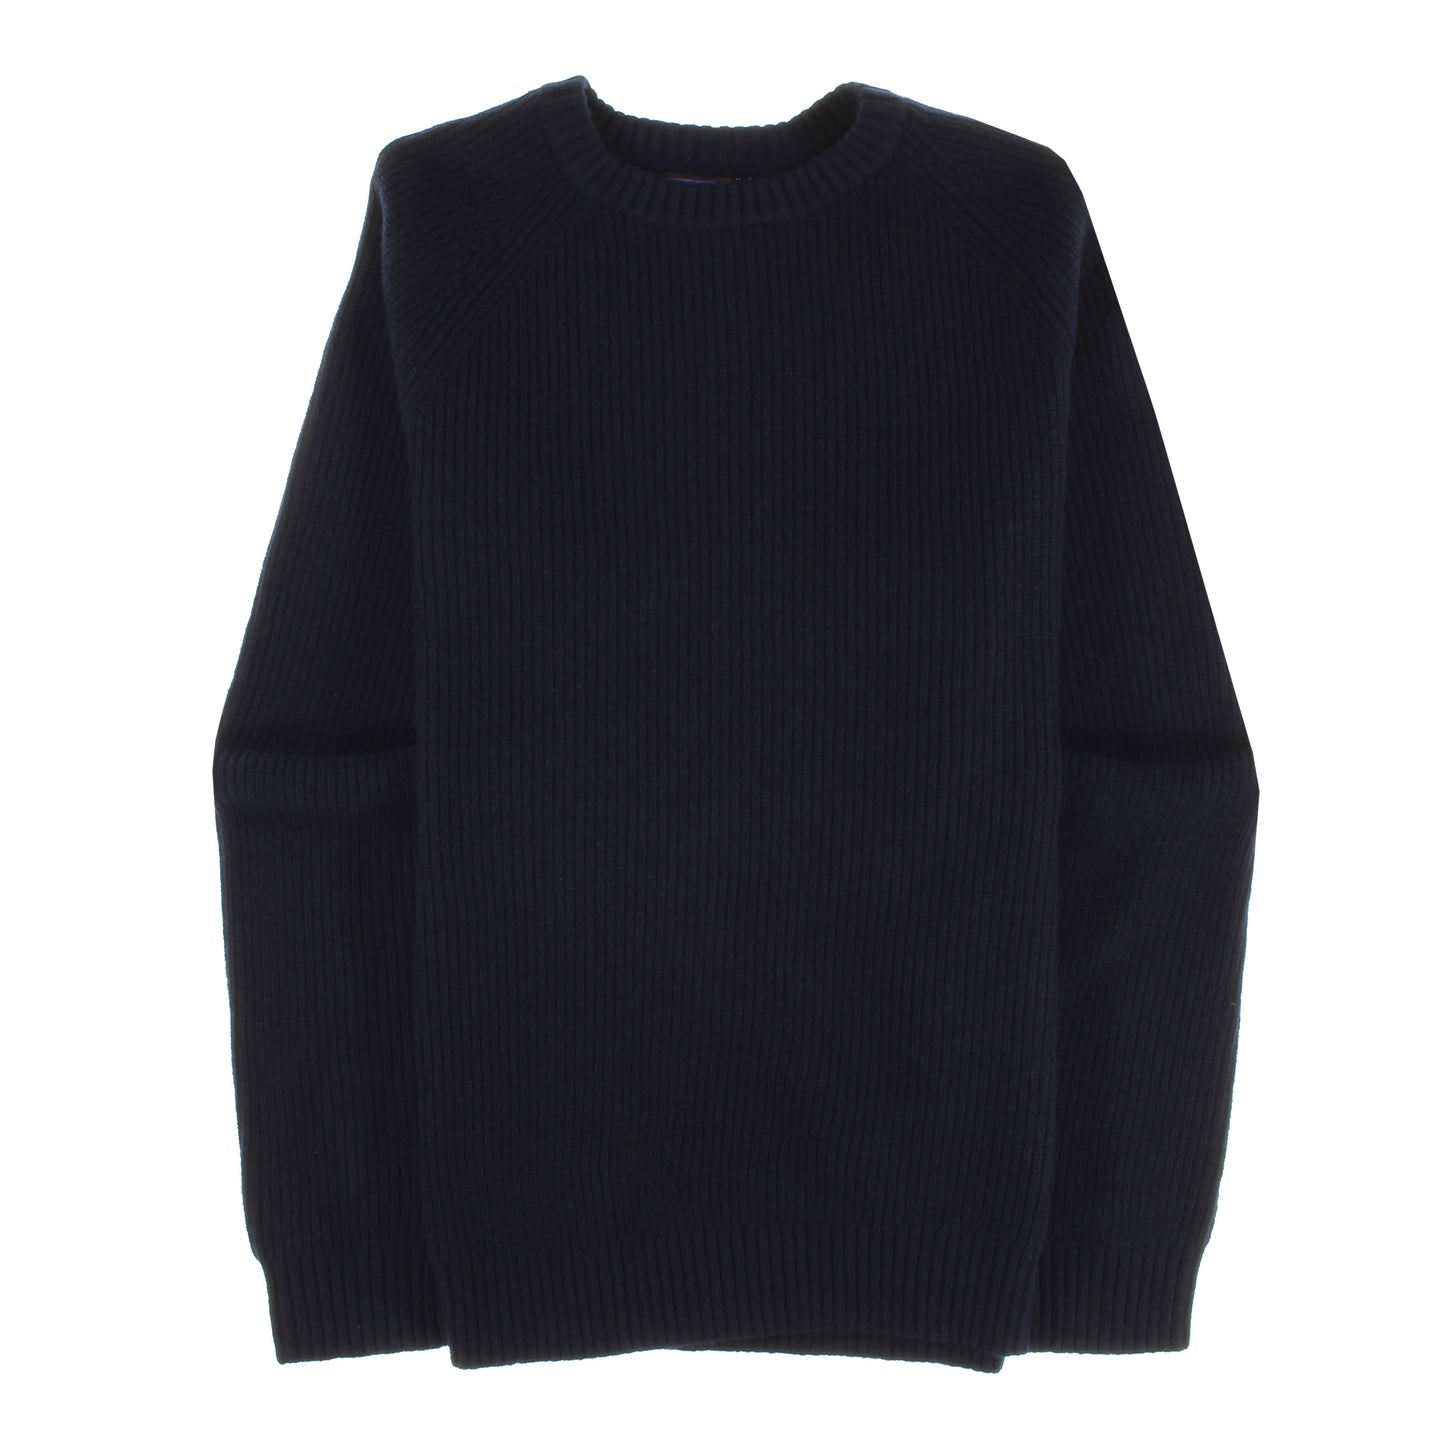 M's Recycled Wool Crewneck Sweater